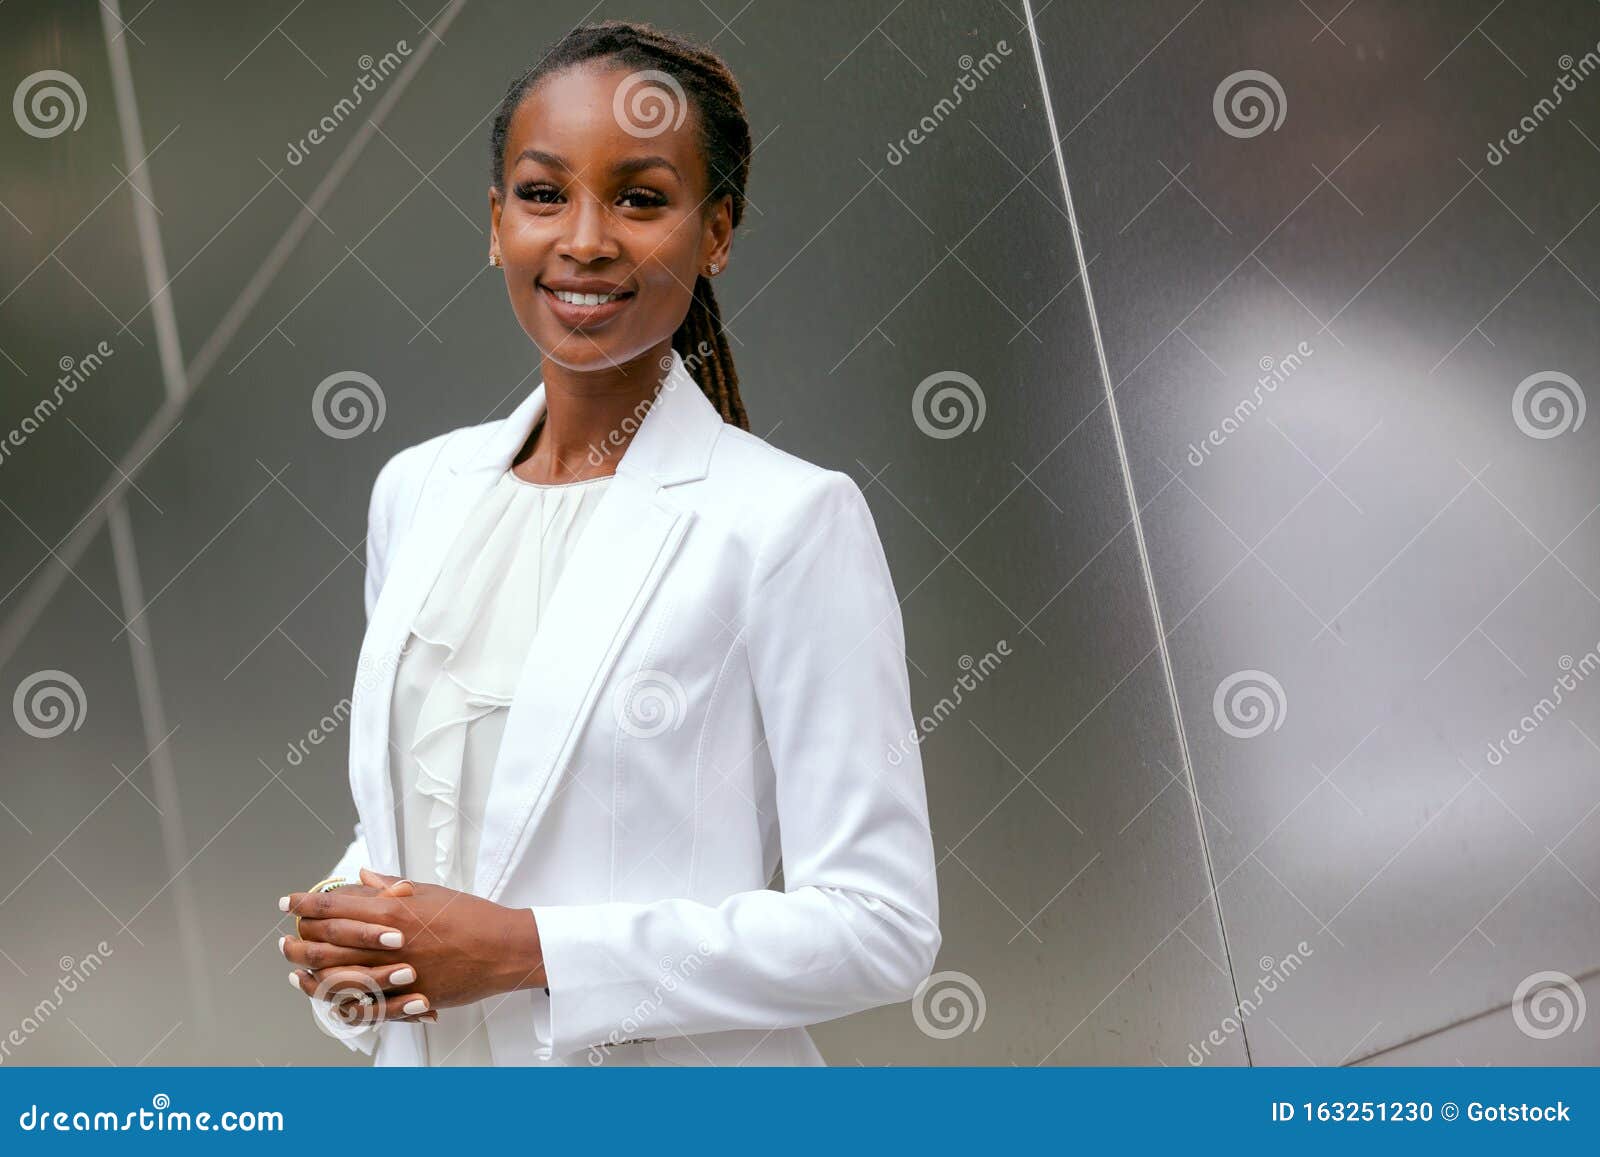 headshot of an african american business woman, ceo, finance, law, attorney, legal, representative